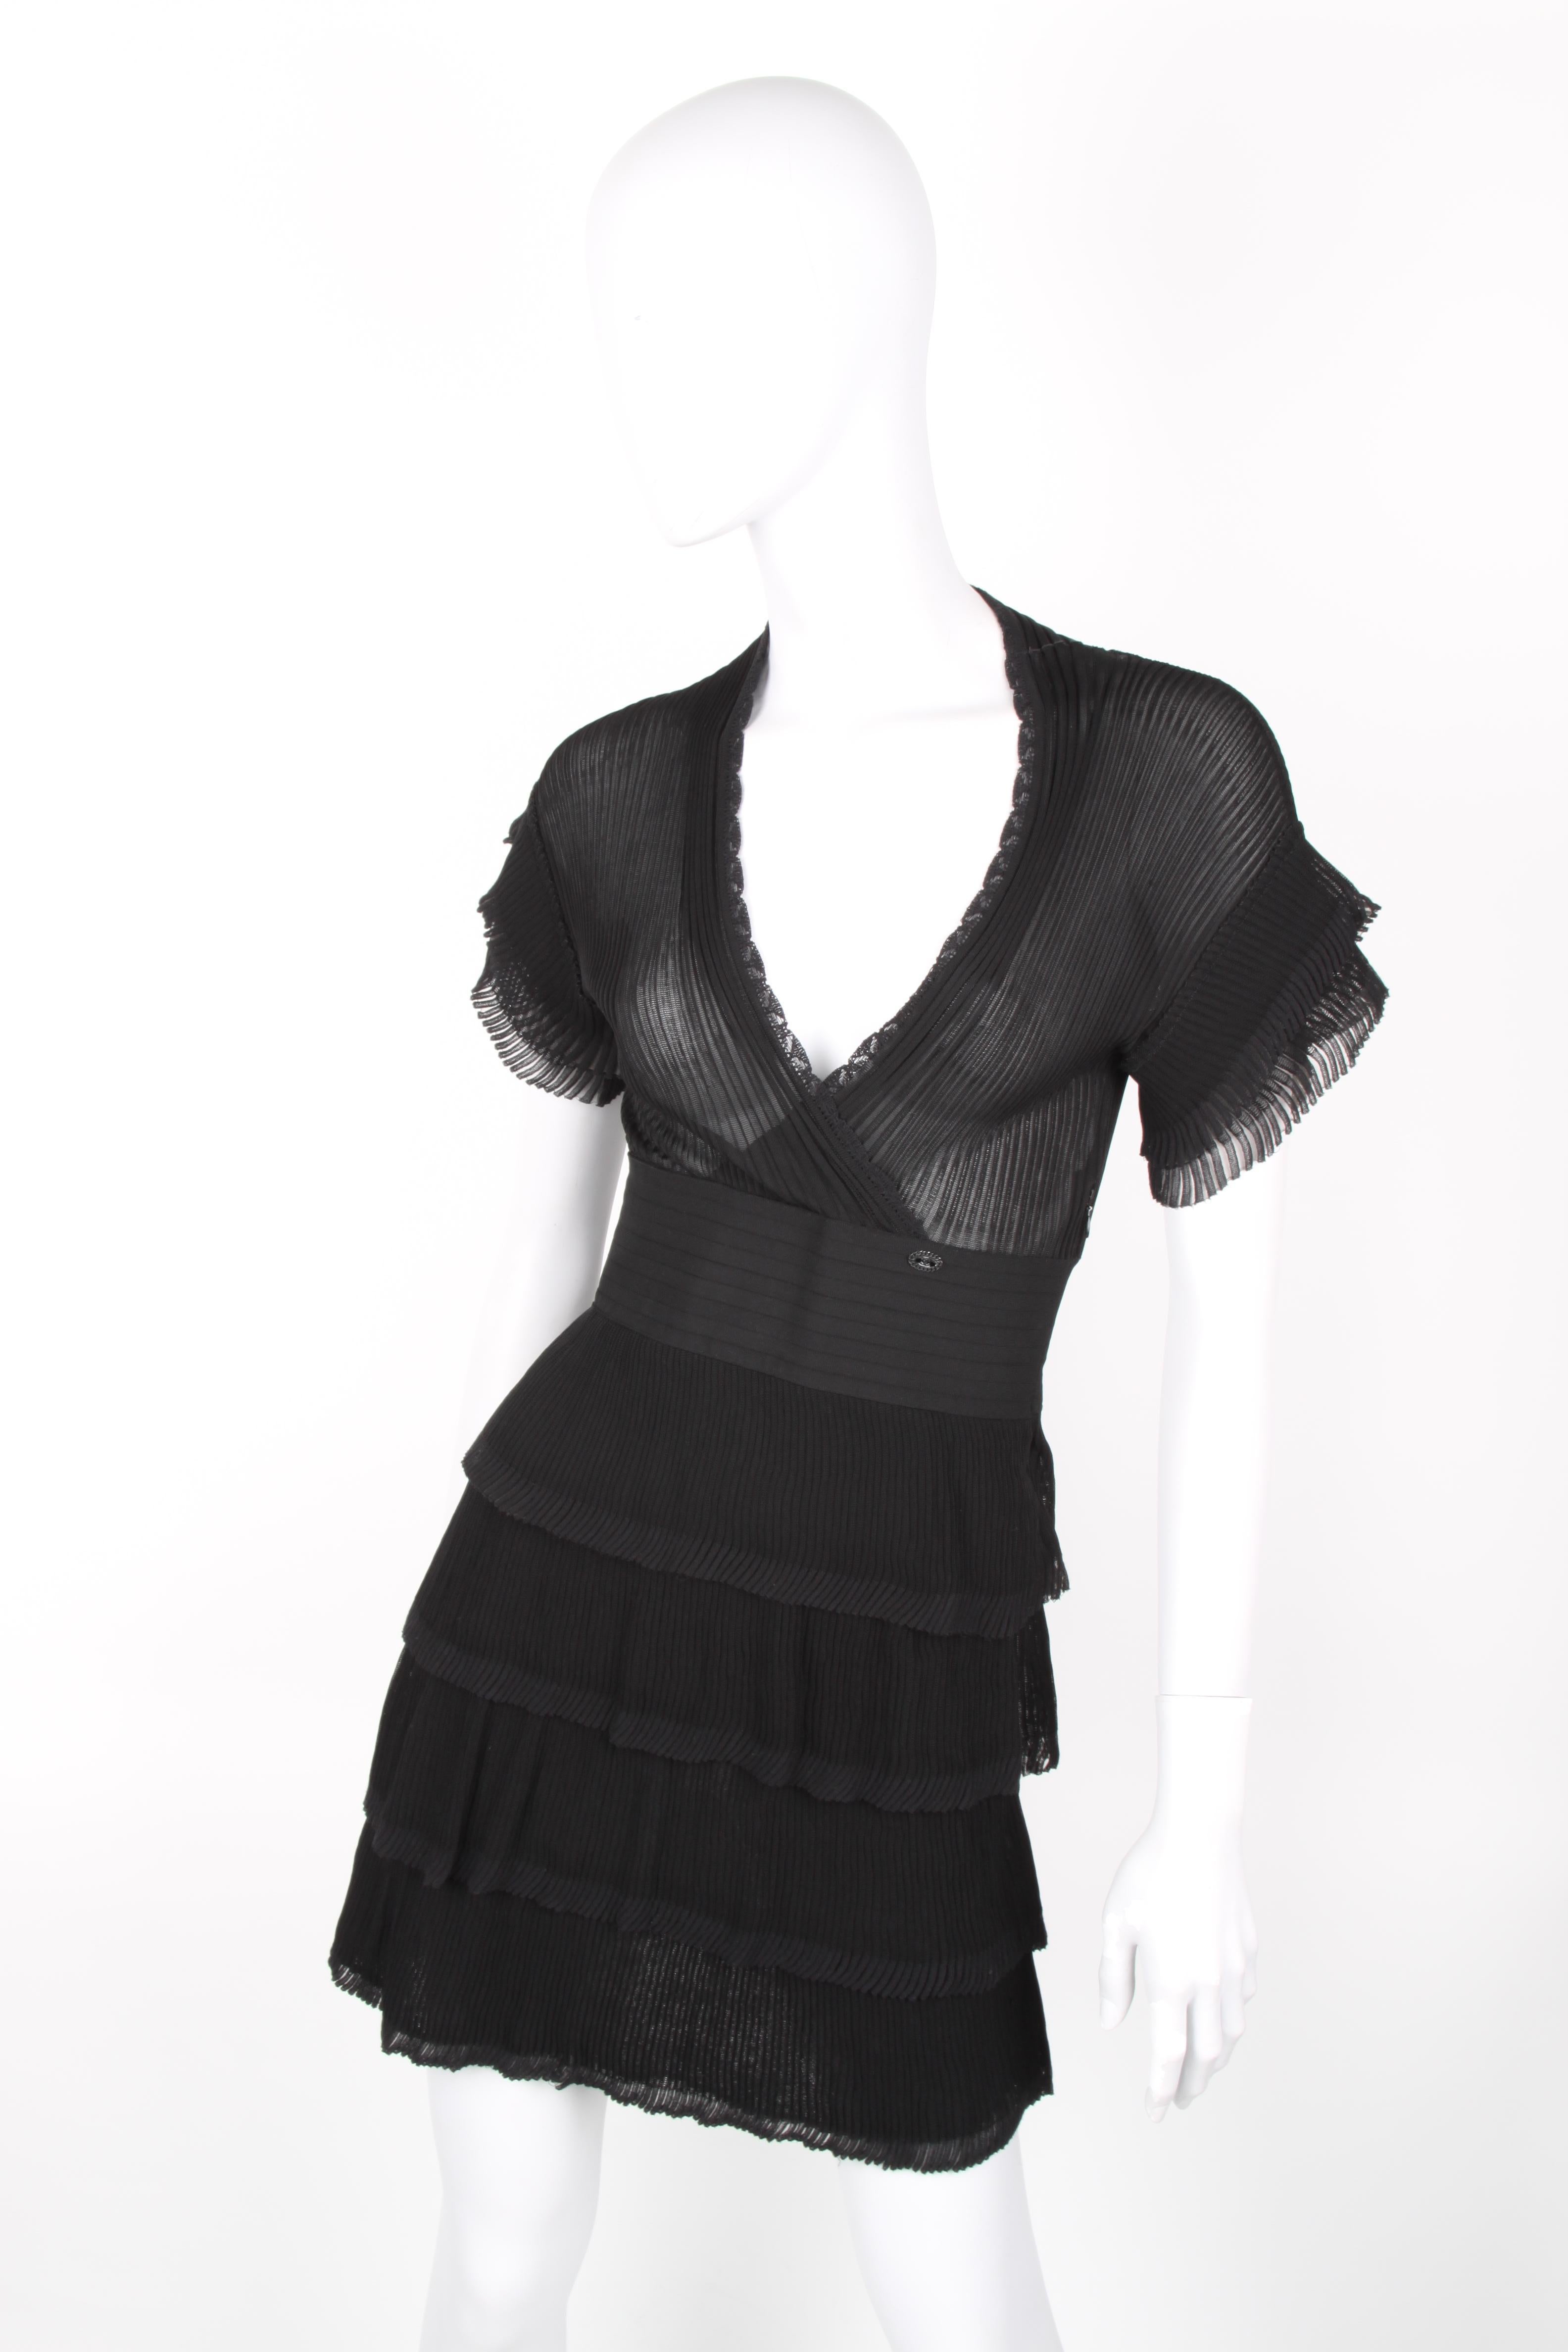 Chanel Fall/Winter 2007 black layered short sleeve dress For Sale 1